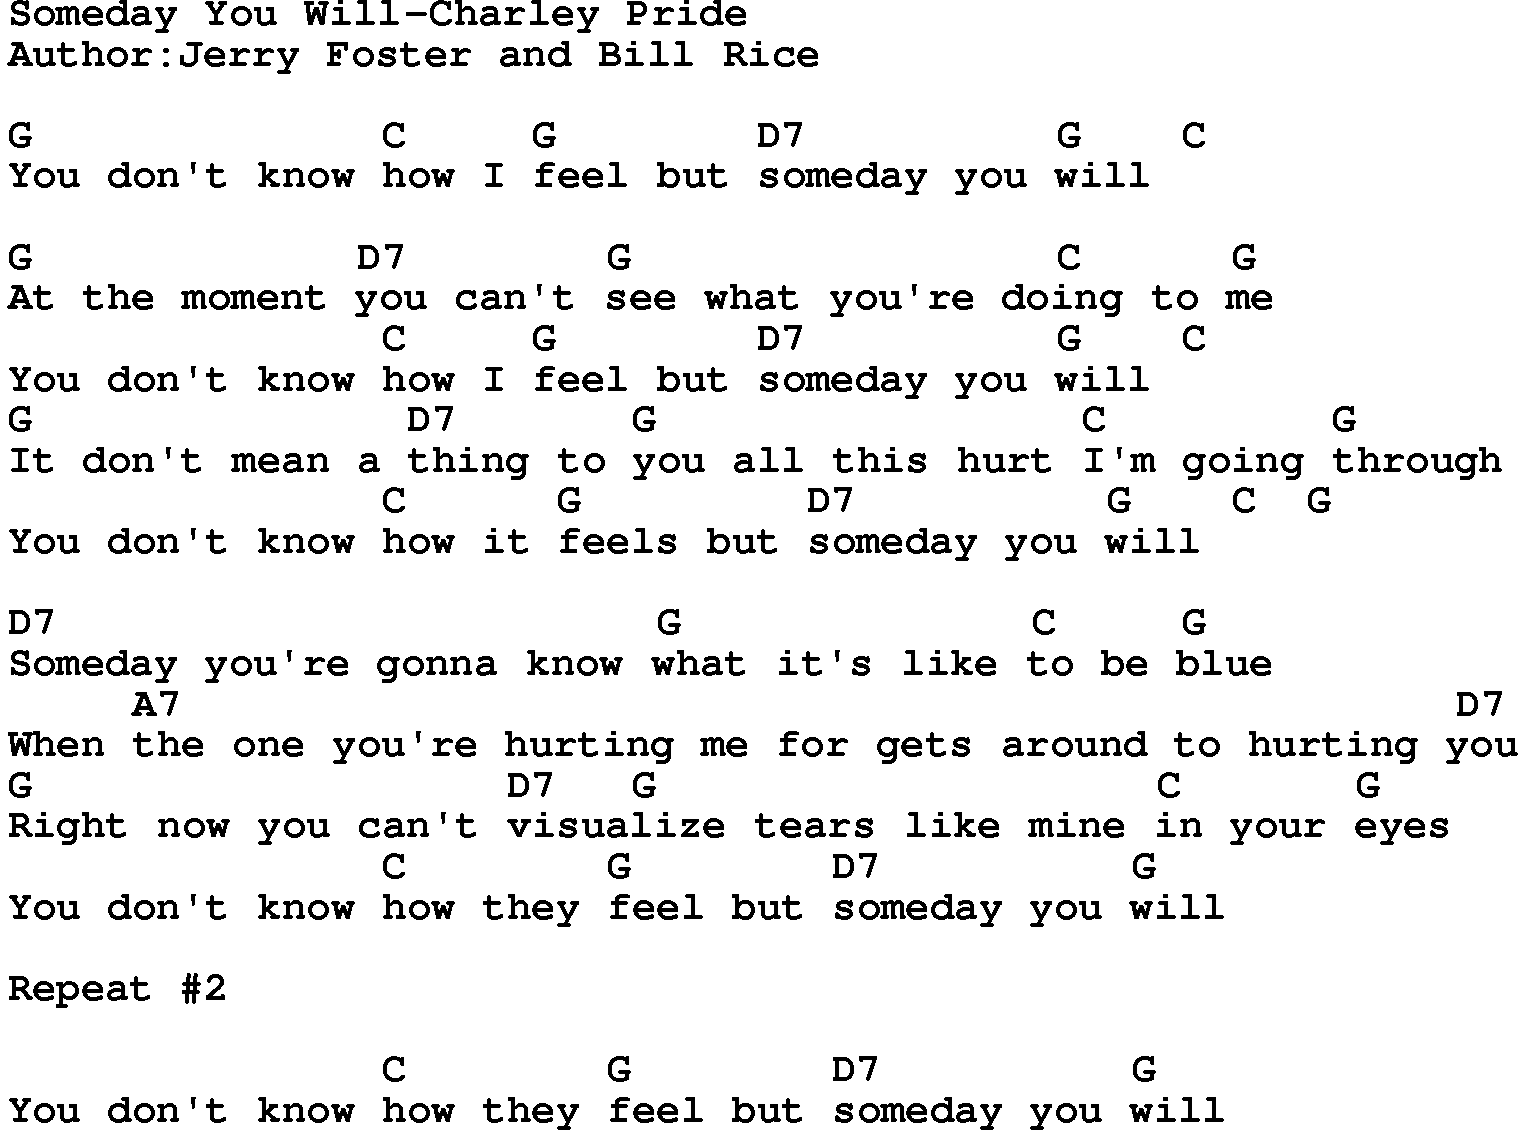 Country music song: Someday You Will-Charley Pride lyrics and chords